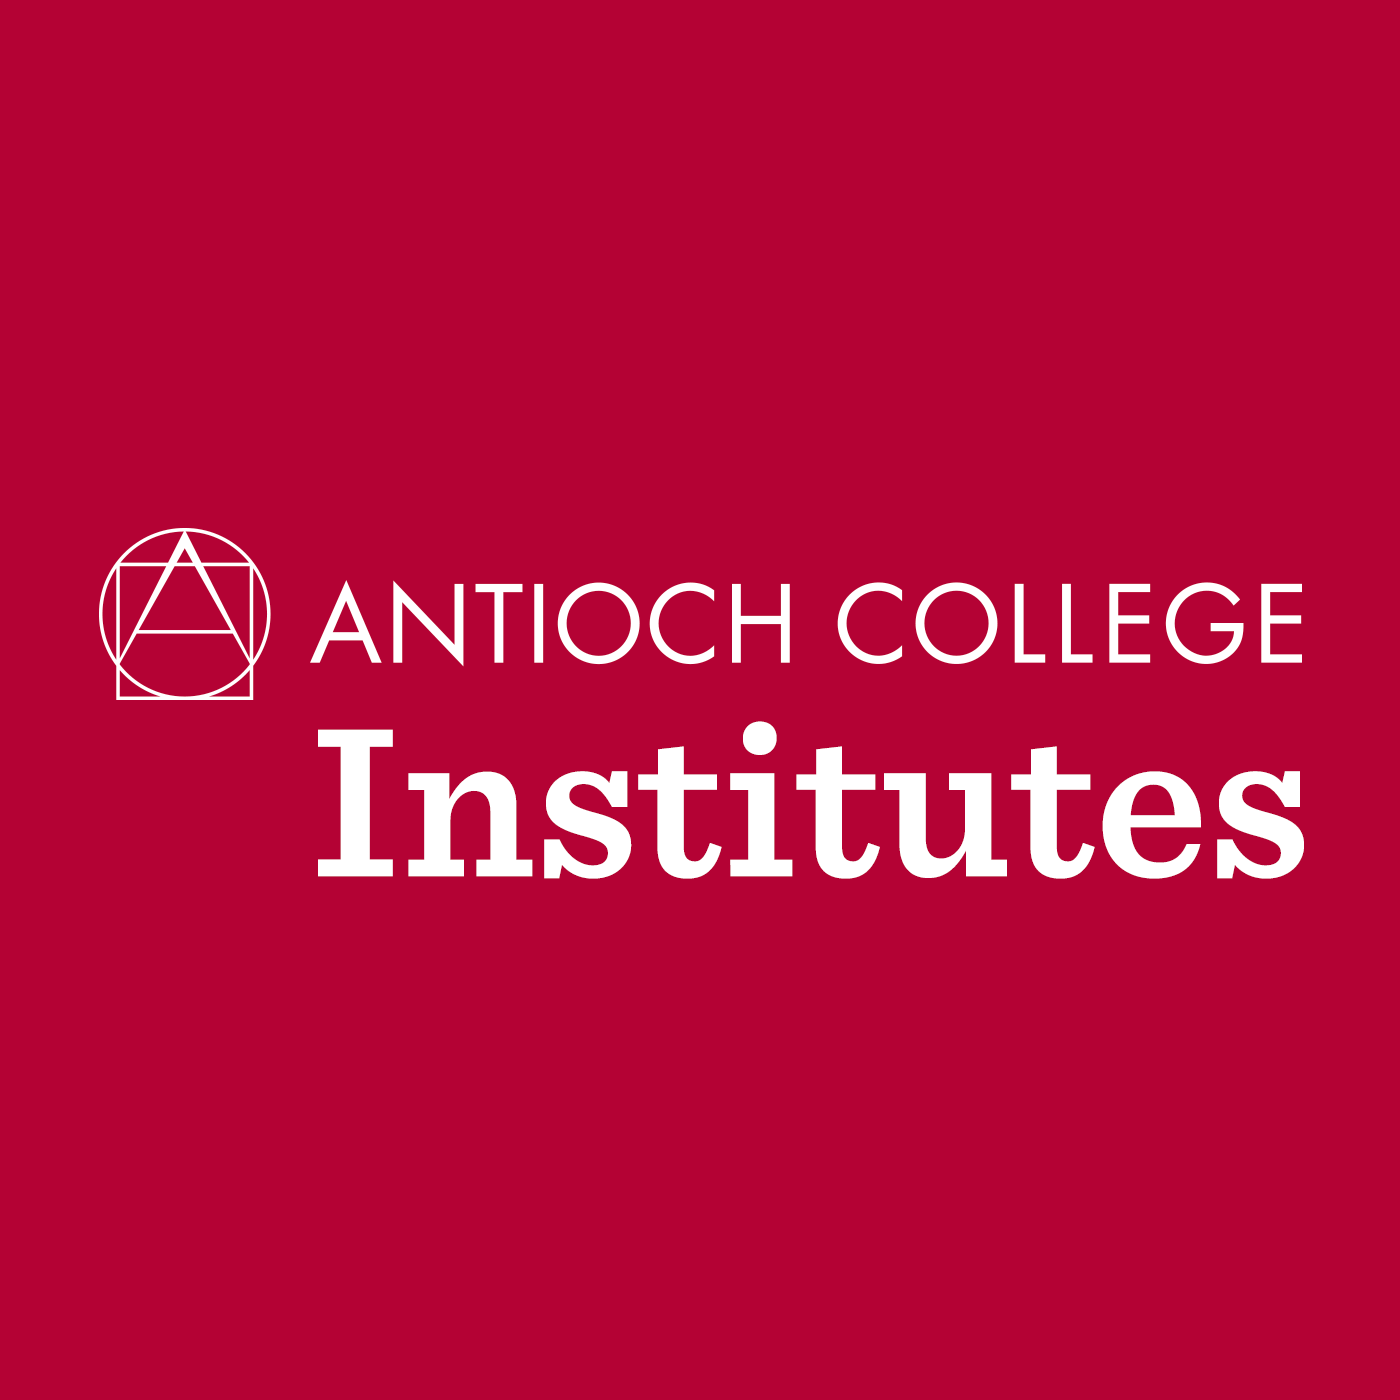 Antioch College Institutes: view more!